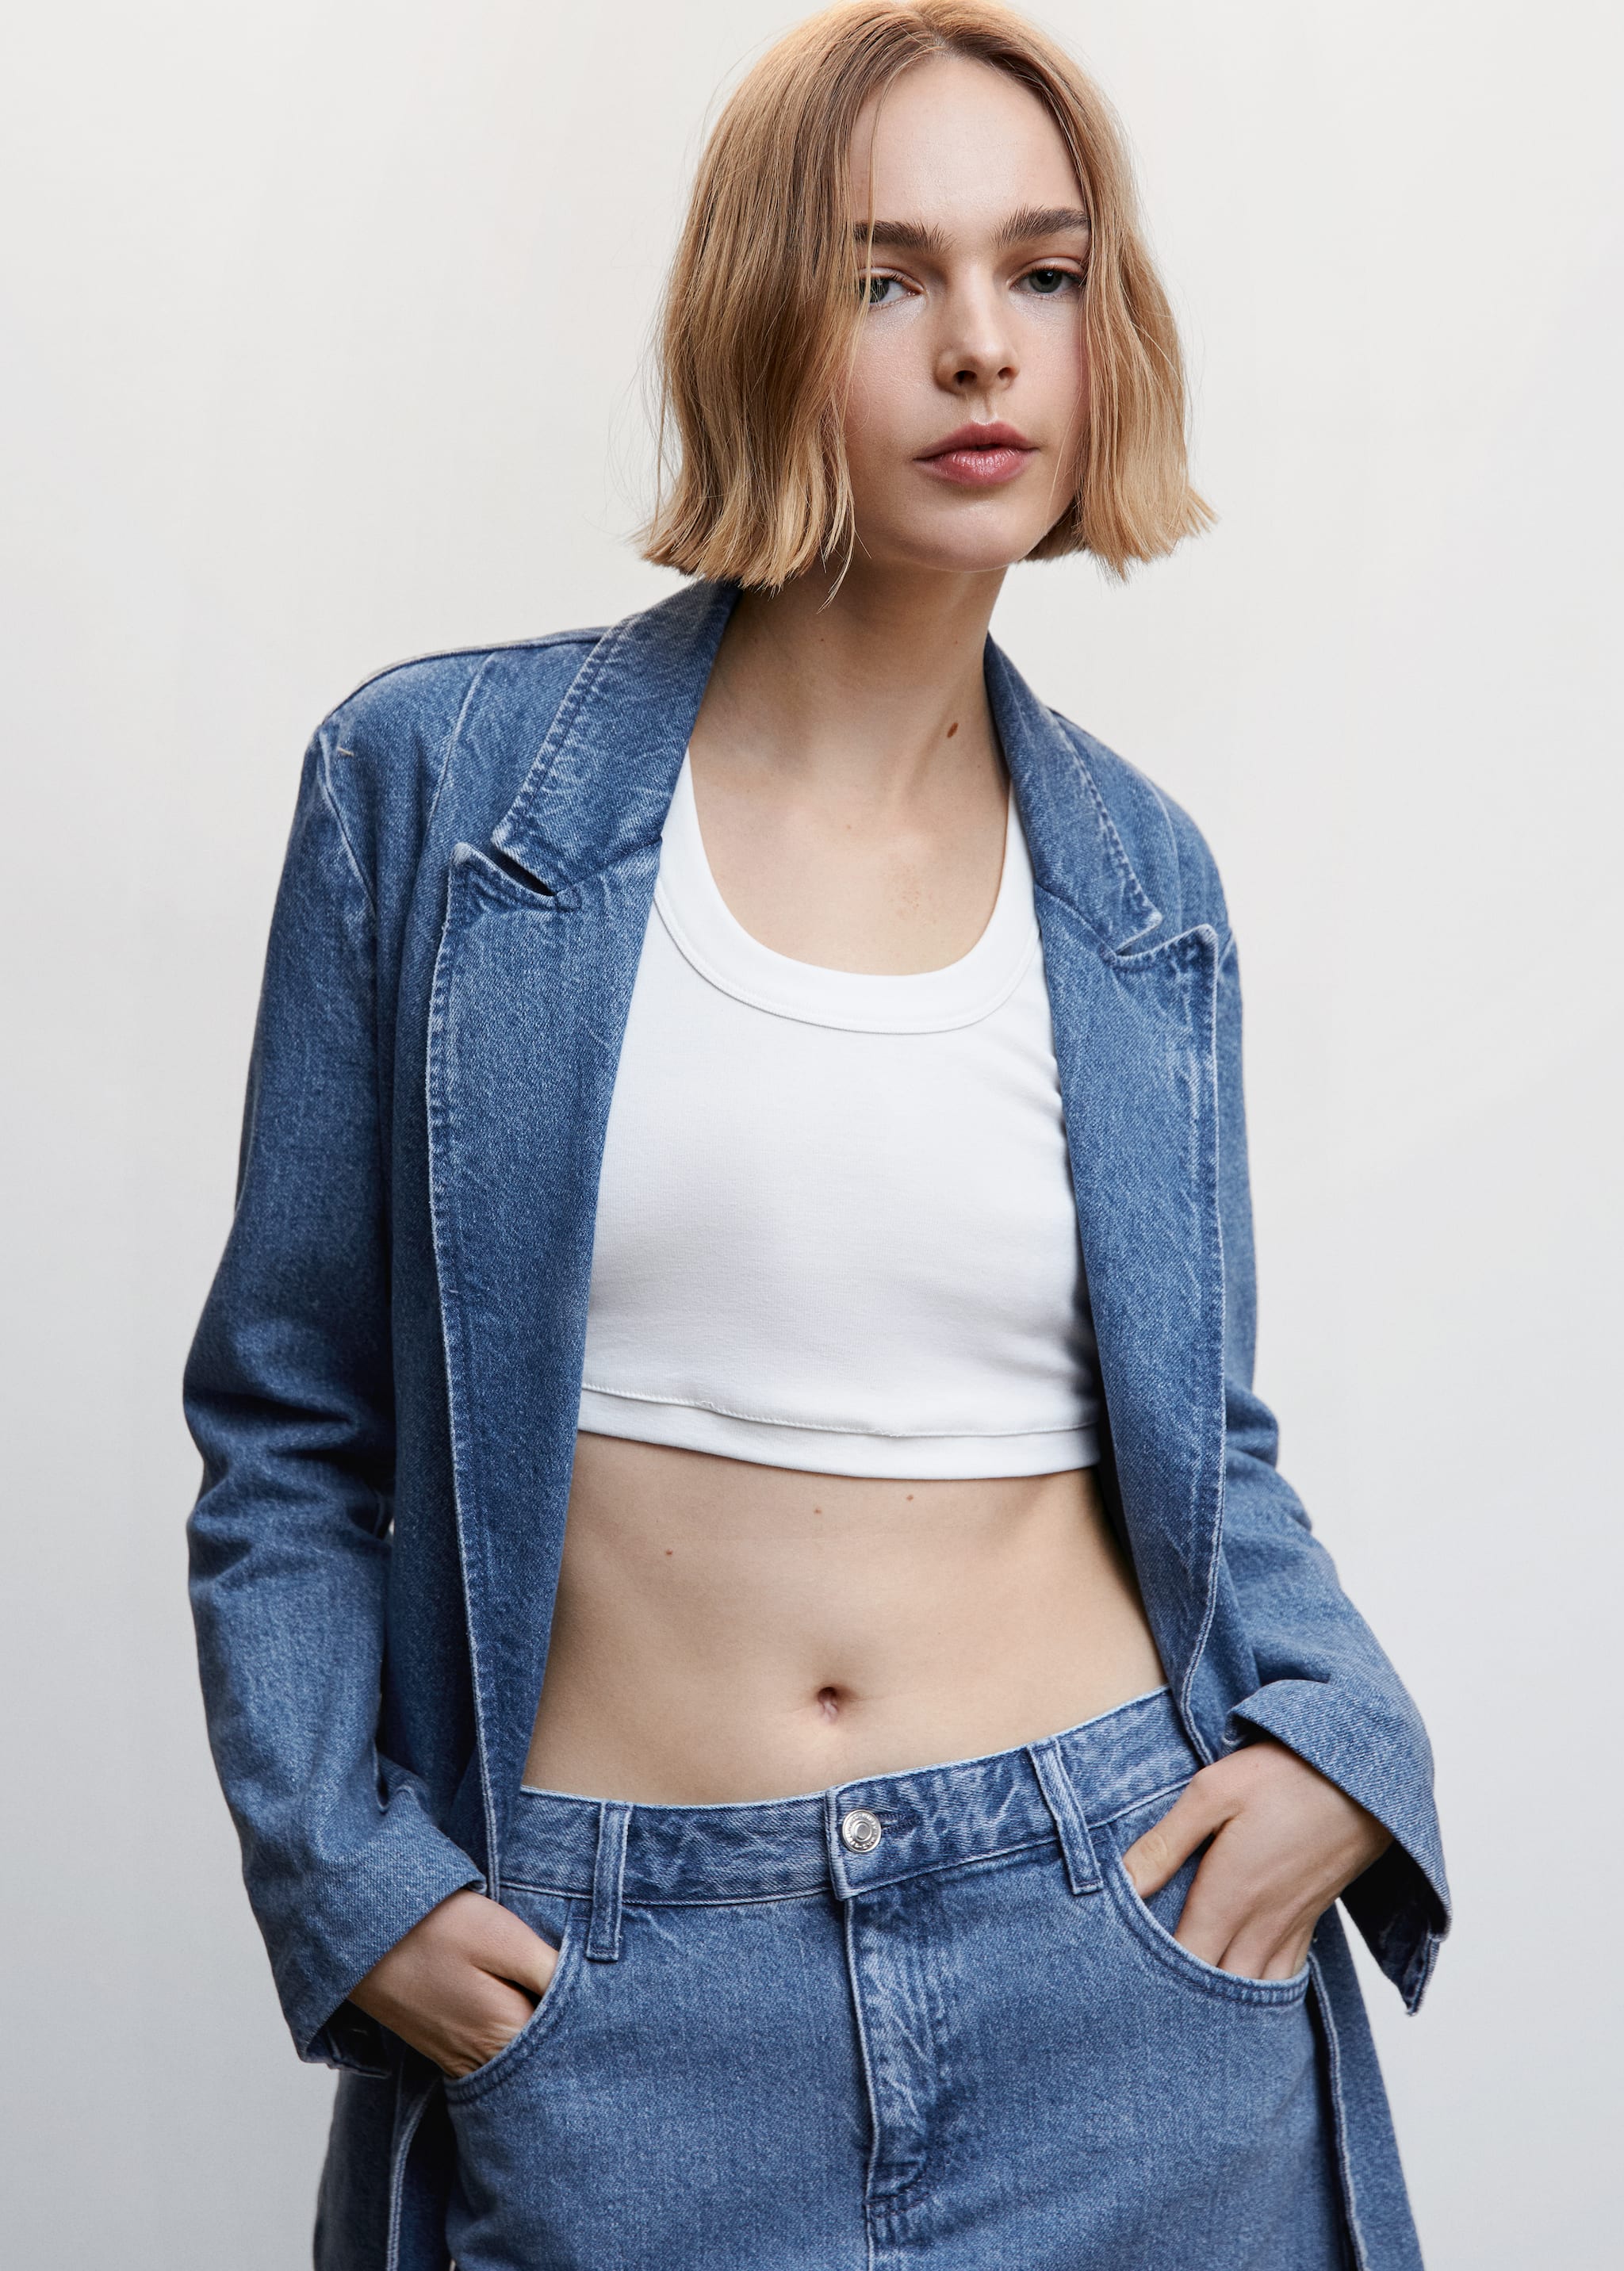 Denim jacket with pockets - Details of the article 2